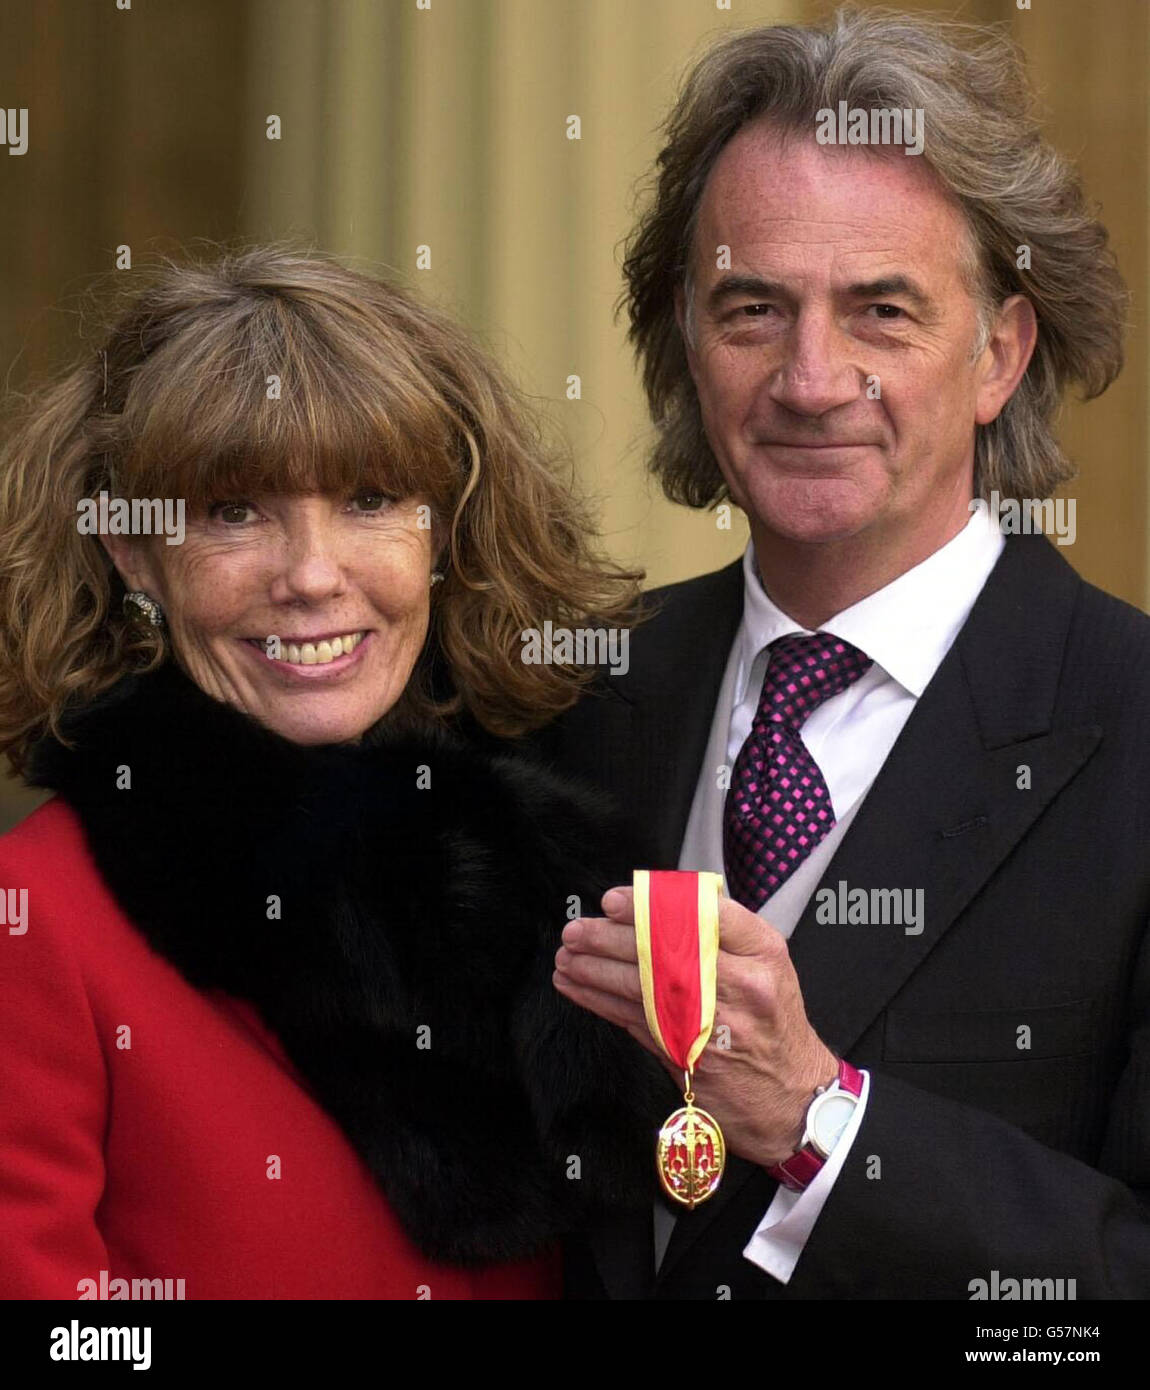 Fashion designer Sir Paul Smith with his wife Pauline who was awarded the  Honour of Knighthood (Knights Batchelor) at Buckingham Palace Stock Photo -  Alamy